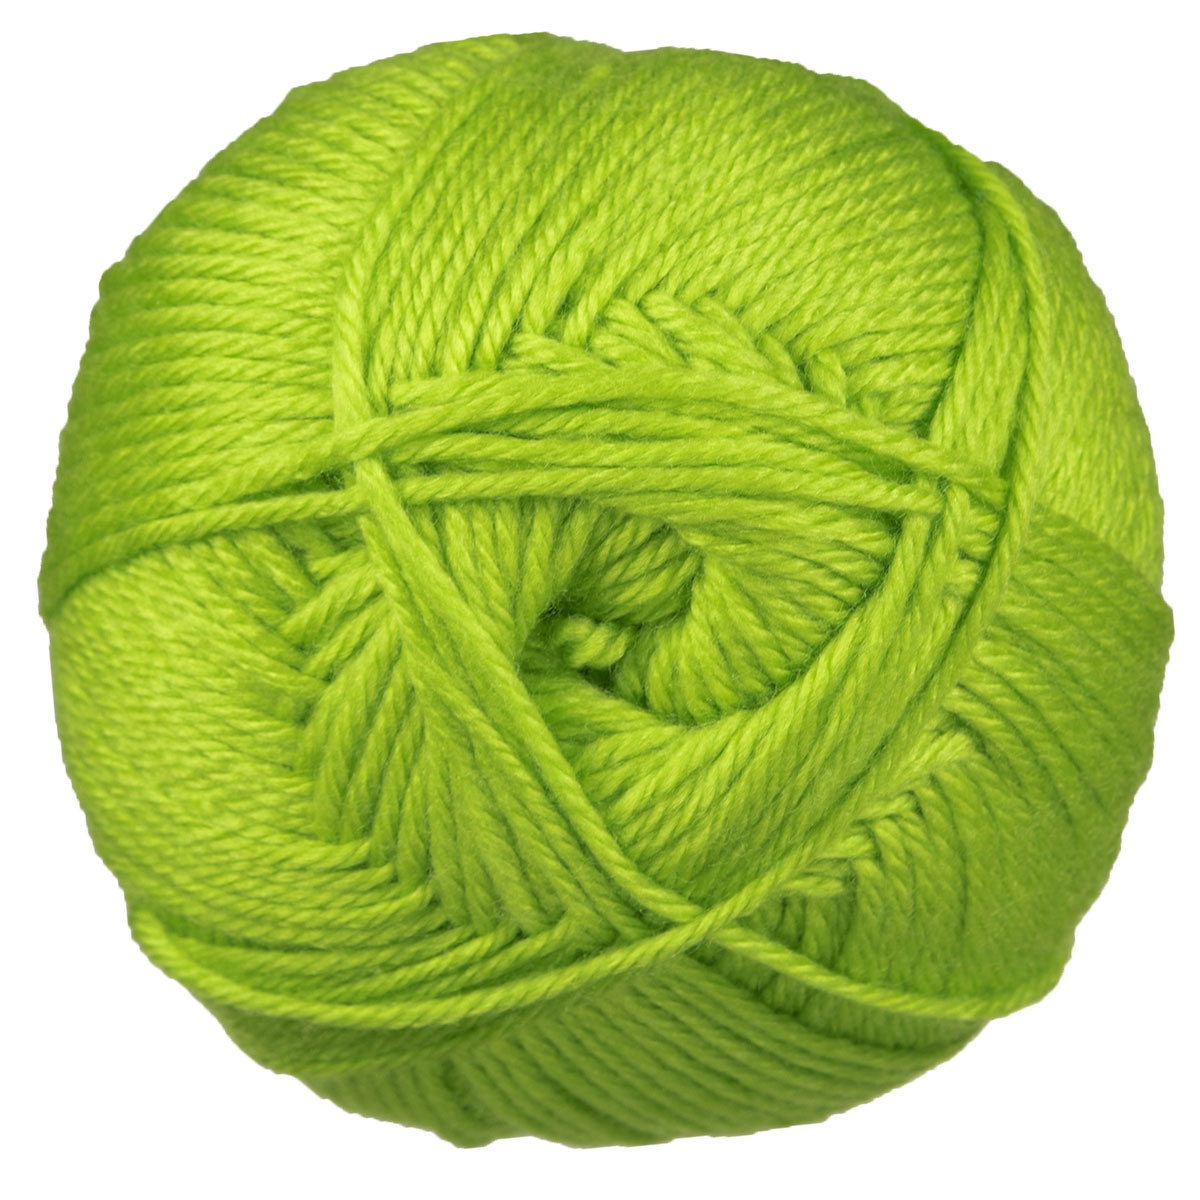 Cascade Pacific Yarn - 095 Lime Green at Jimmy Beans Wool